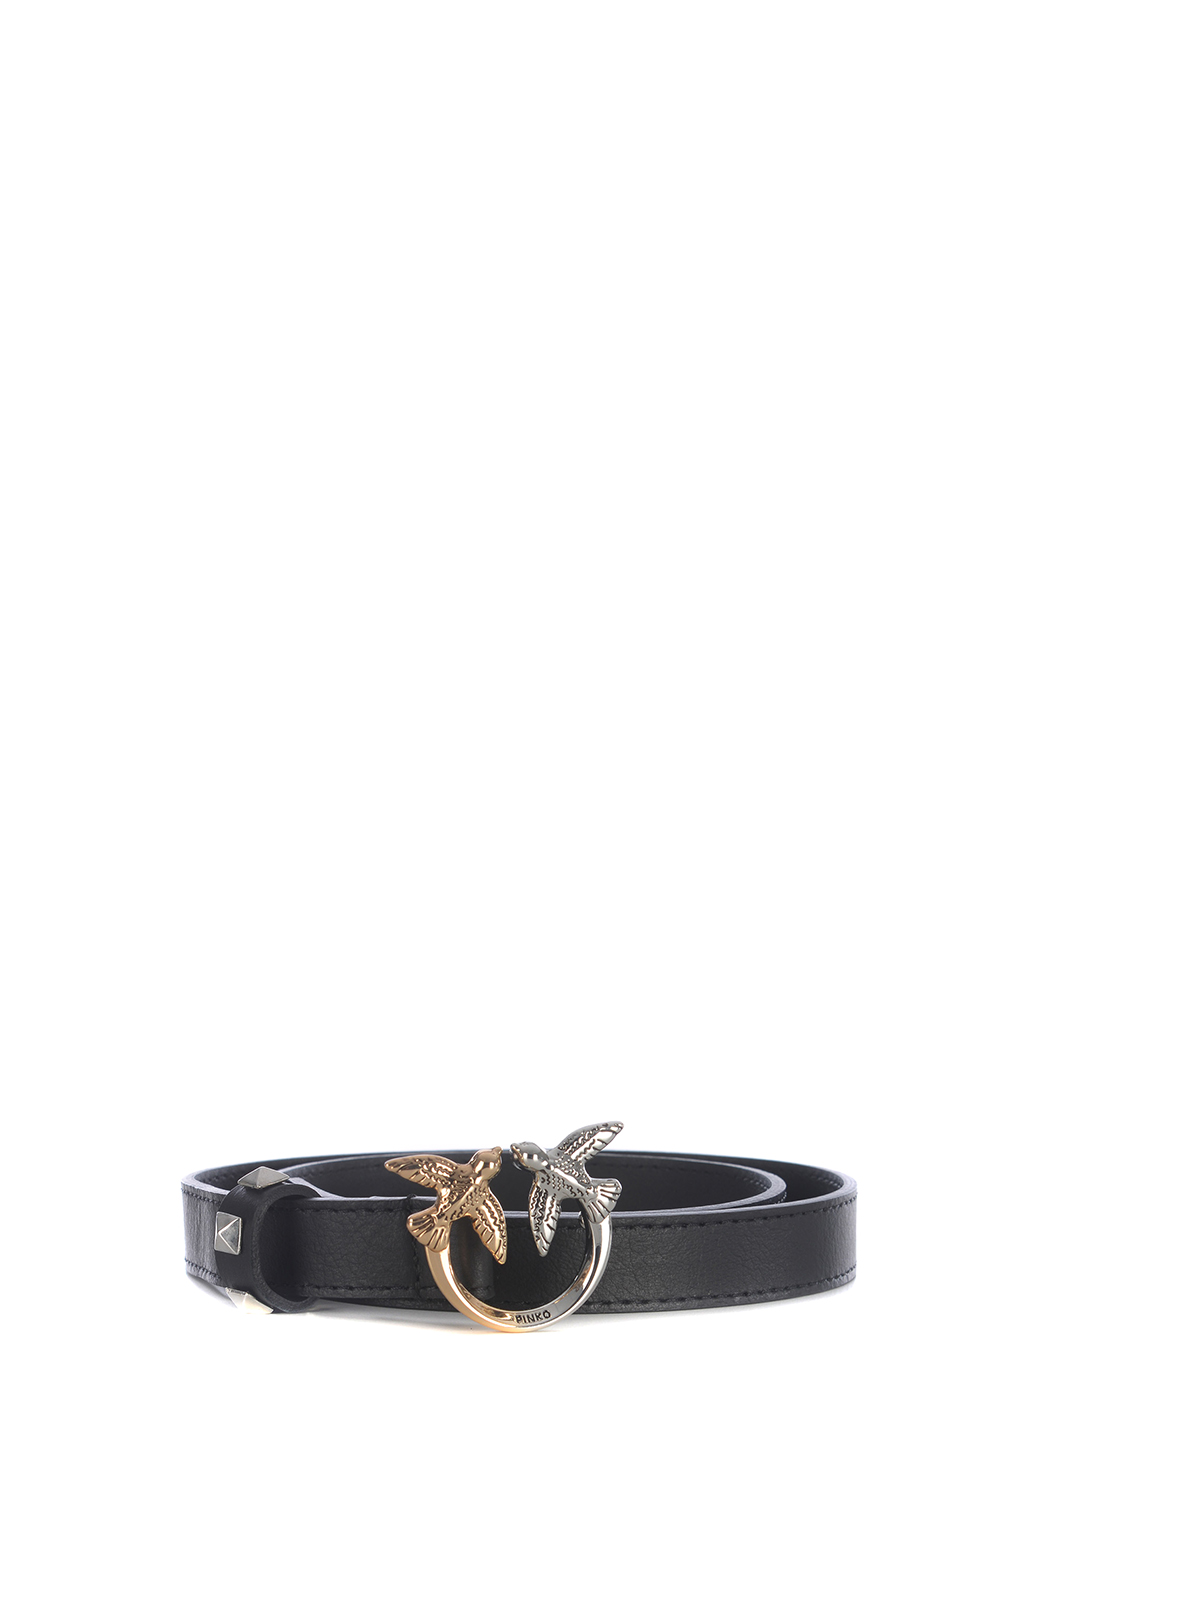 Pinko Leather Belt Withlogo Buckle In Black